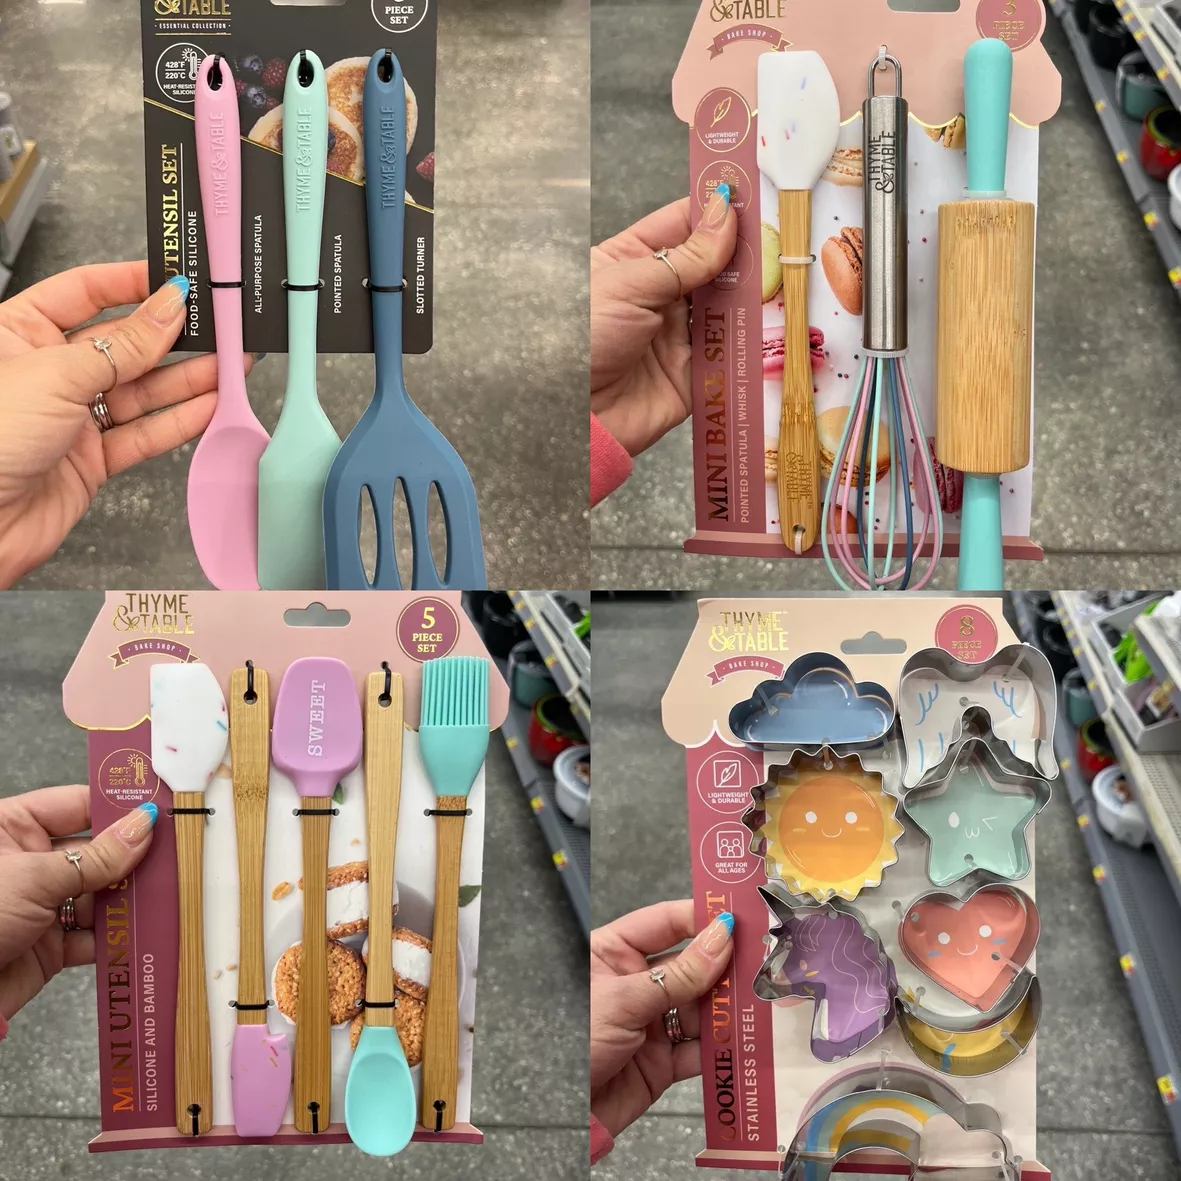 Thyme and Table Utensils  NEW Adorable Kitchen Utensils!